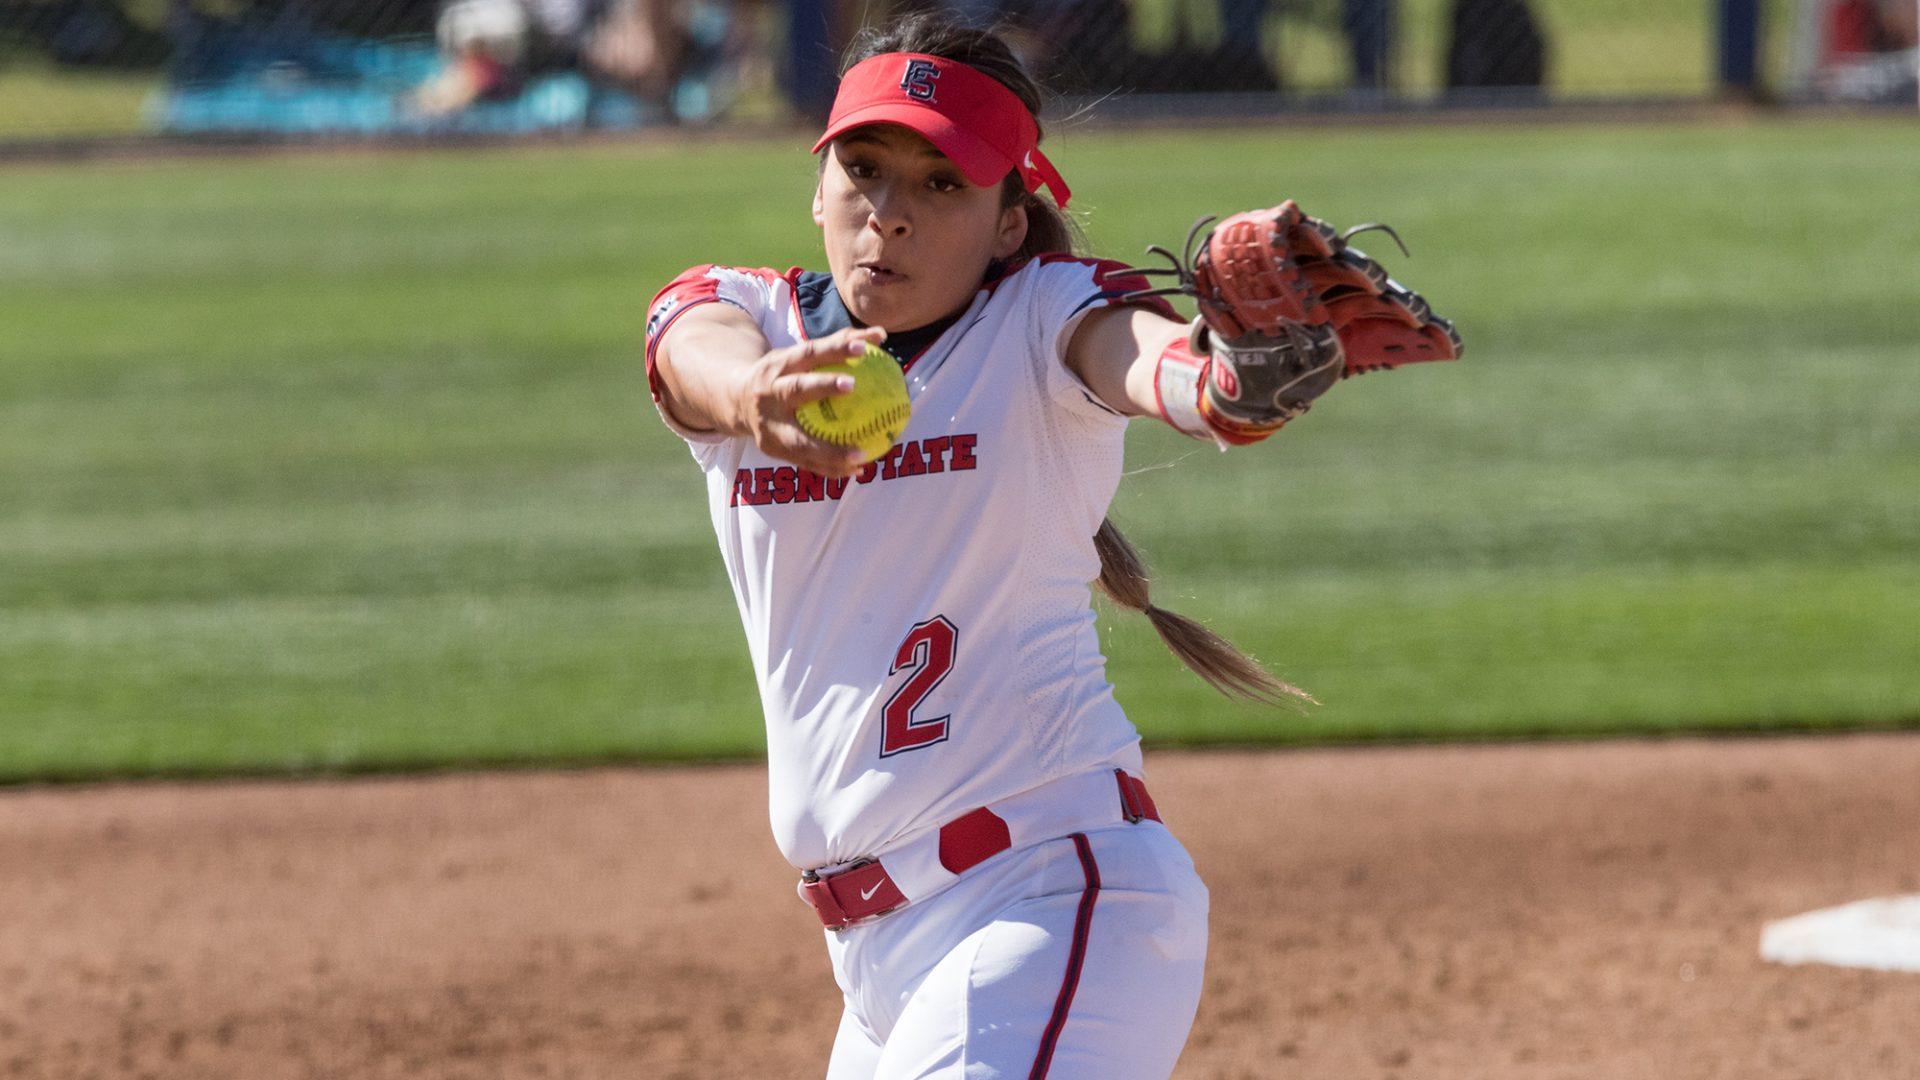 Sophomore Samantha Mejia pitched all seven innings and only allowed seven hits and one run in Game 2 against the San Diego State Aztecs on April 21, 2018 at Margie Wright Diamond. The ‘Dogs won the series 2-1.  (Fresno State Athletics) 